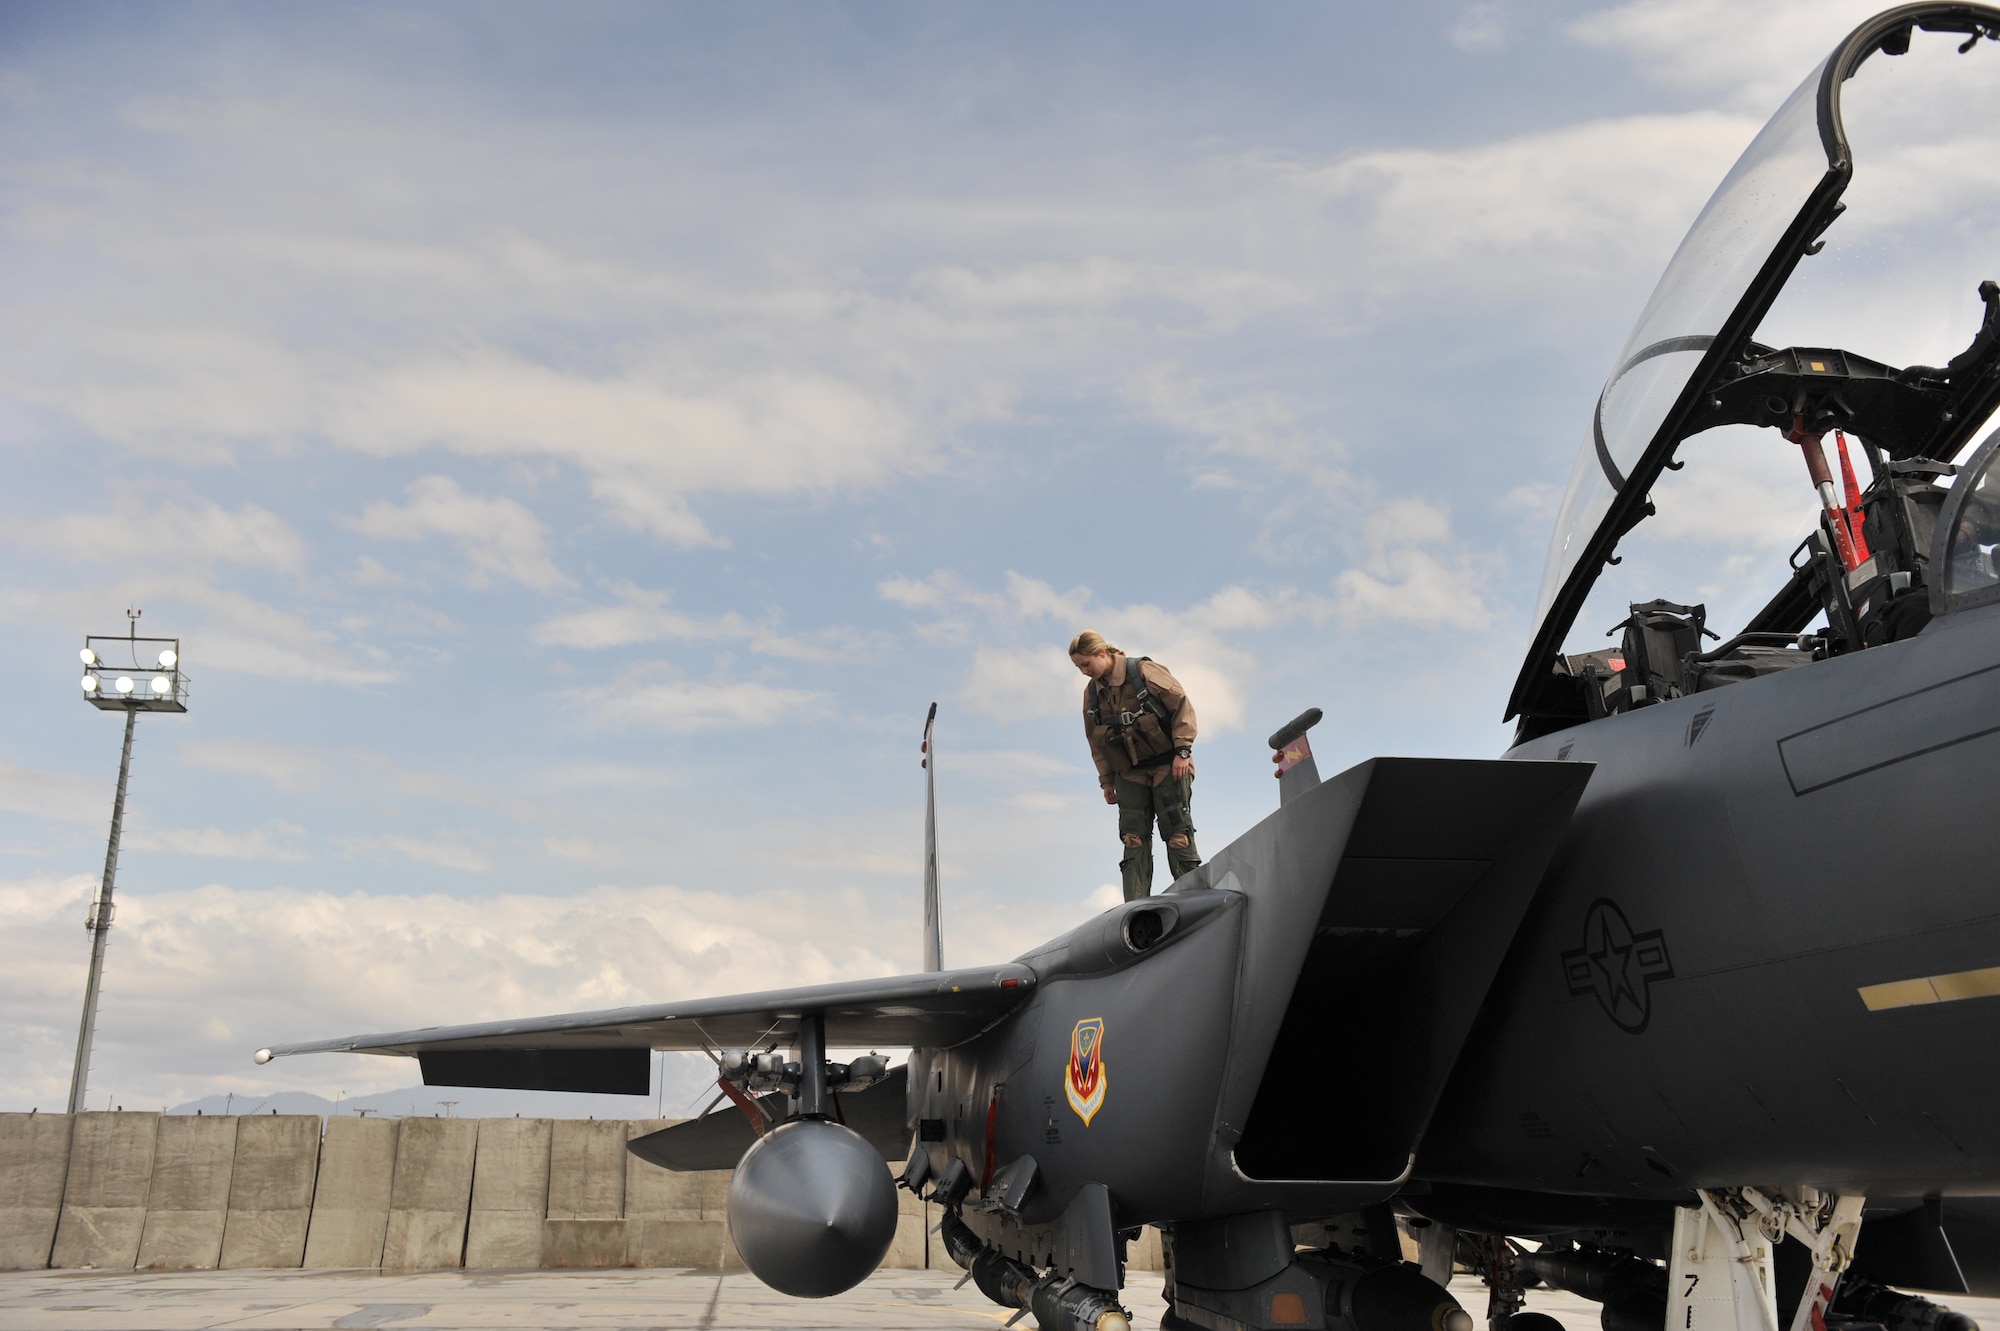 Capt. Jennifer Morton performs a preflight inspection before take off March 29, 2011, at Bagram Airfield, Afghanistan. Morton is a 389th Expeditionary Fighter Squadron weapon system officer. (U.S. Air Force photo/Senior Airman Sheila deVera)